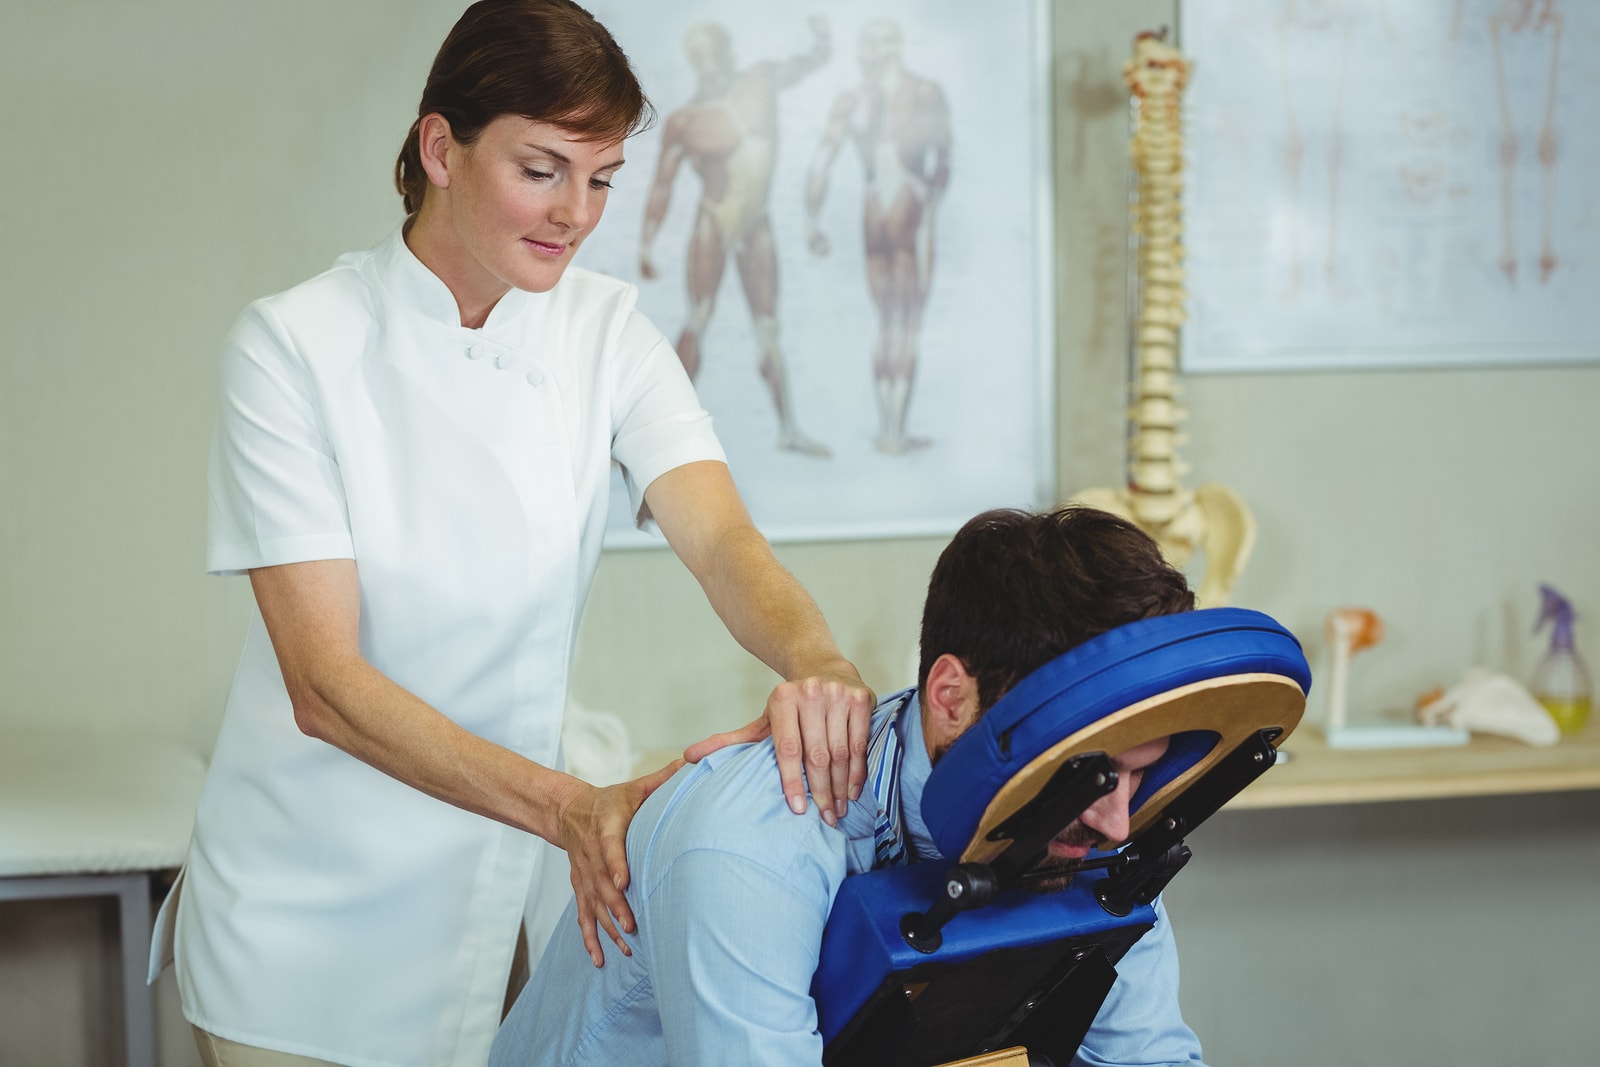 Take Control of Your Chronic Pain With AZ Premier Chiropractic and Rehab Now